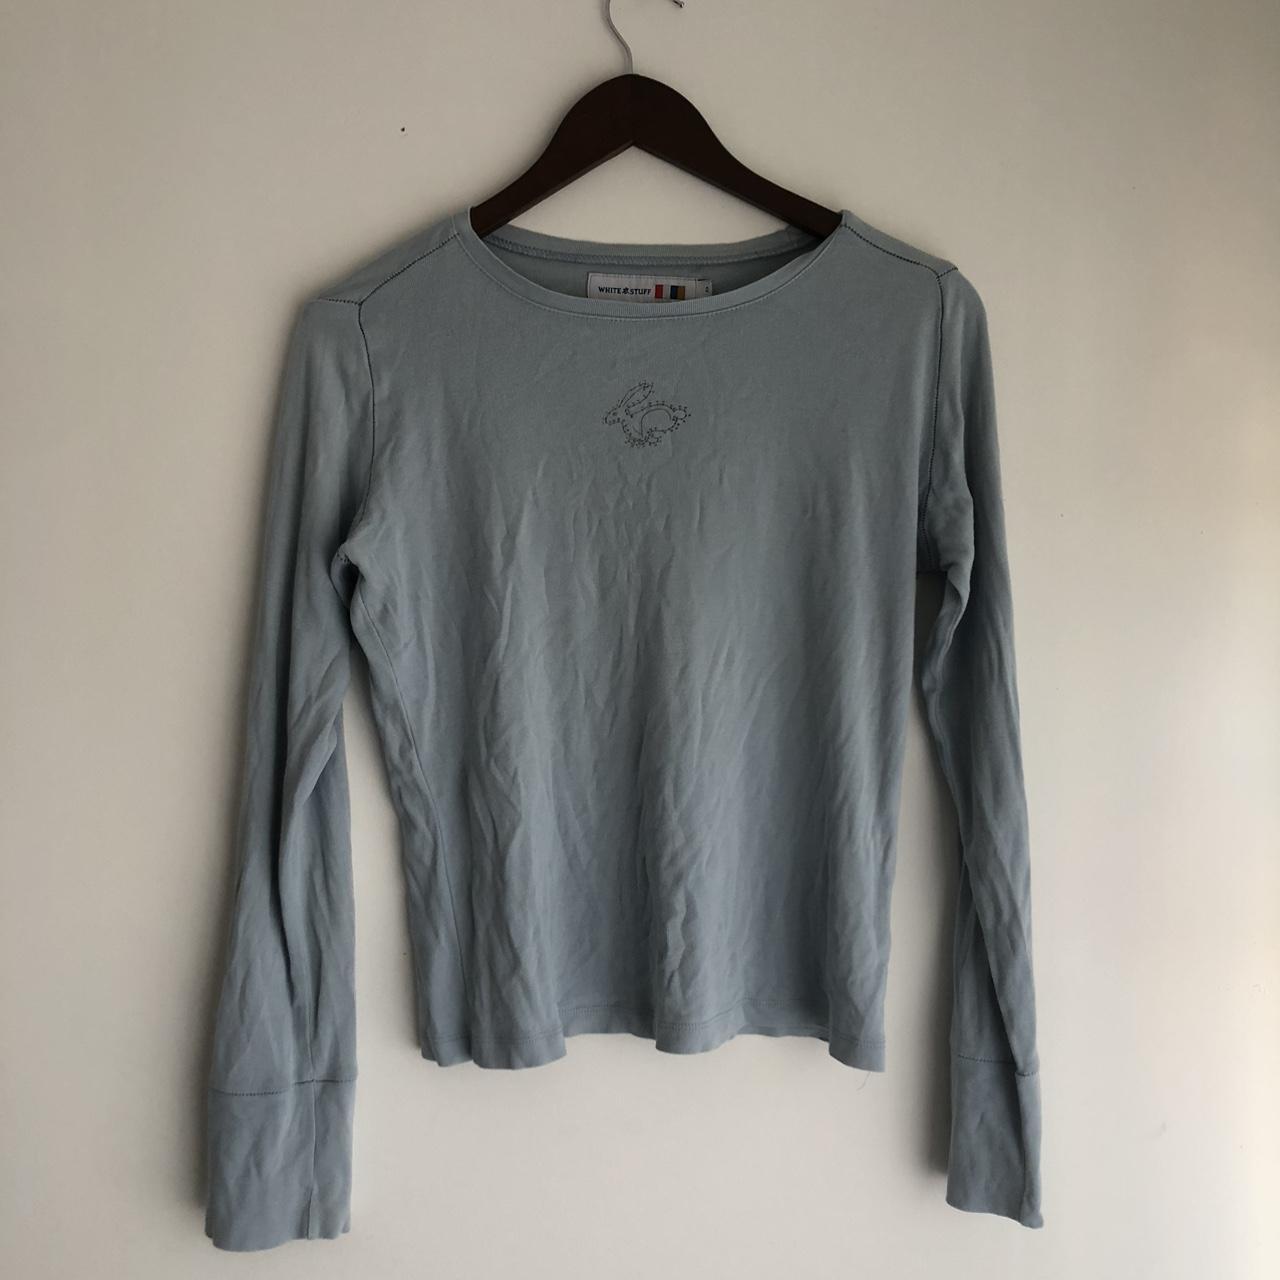 White Stuff pastel baby blue long sleeve tshirt with... - Depop